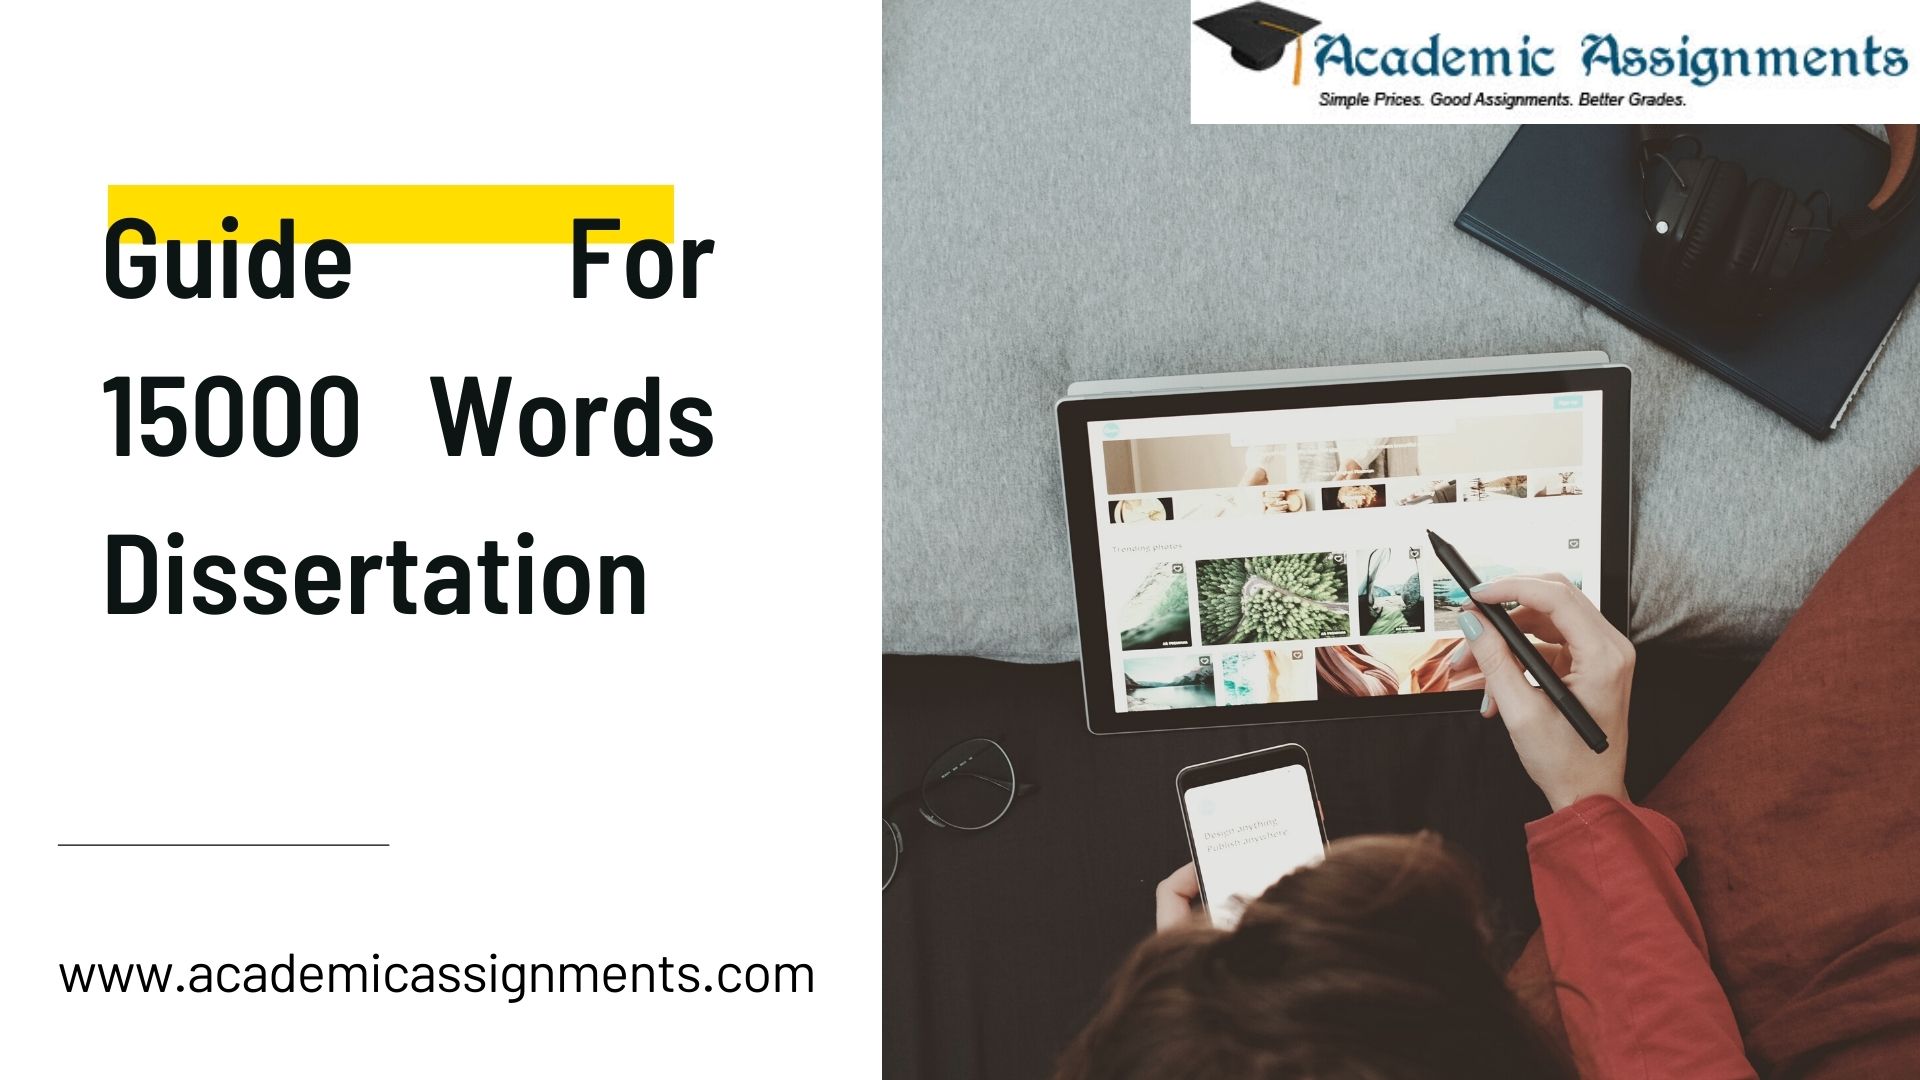 Guide For 15000 Words Dissertation